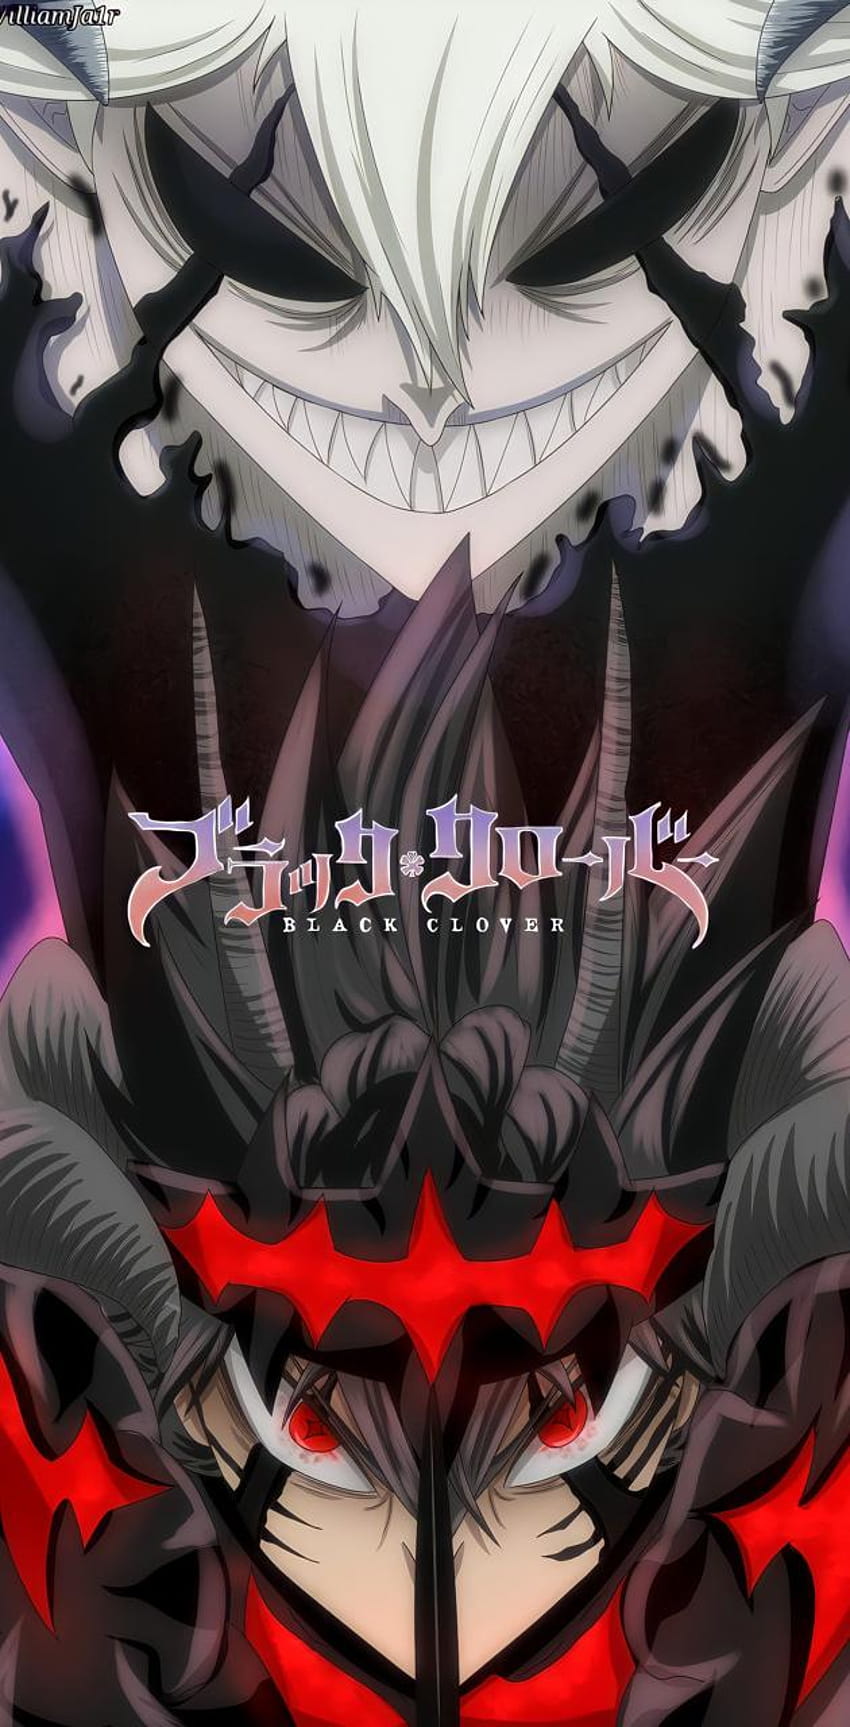 Black clover by Reaperwh, asta and liebe HD phone wallpaper